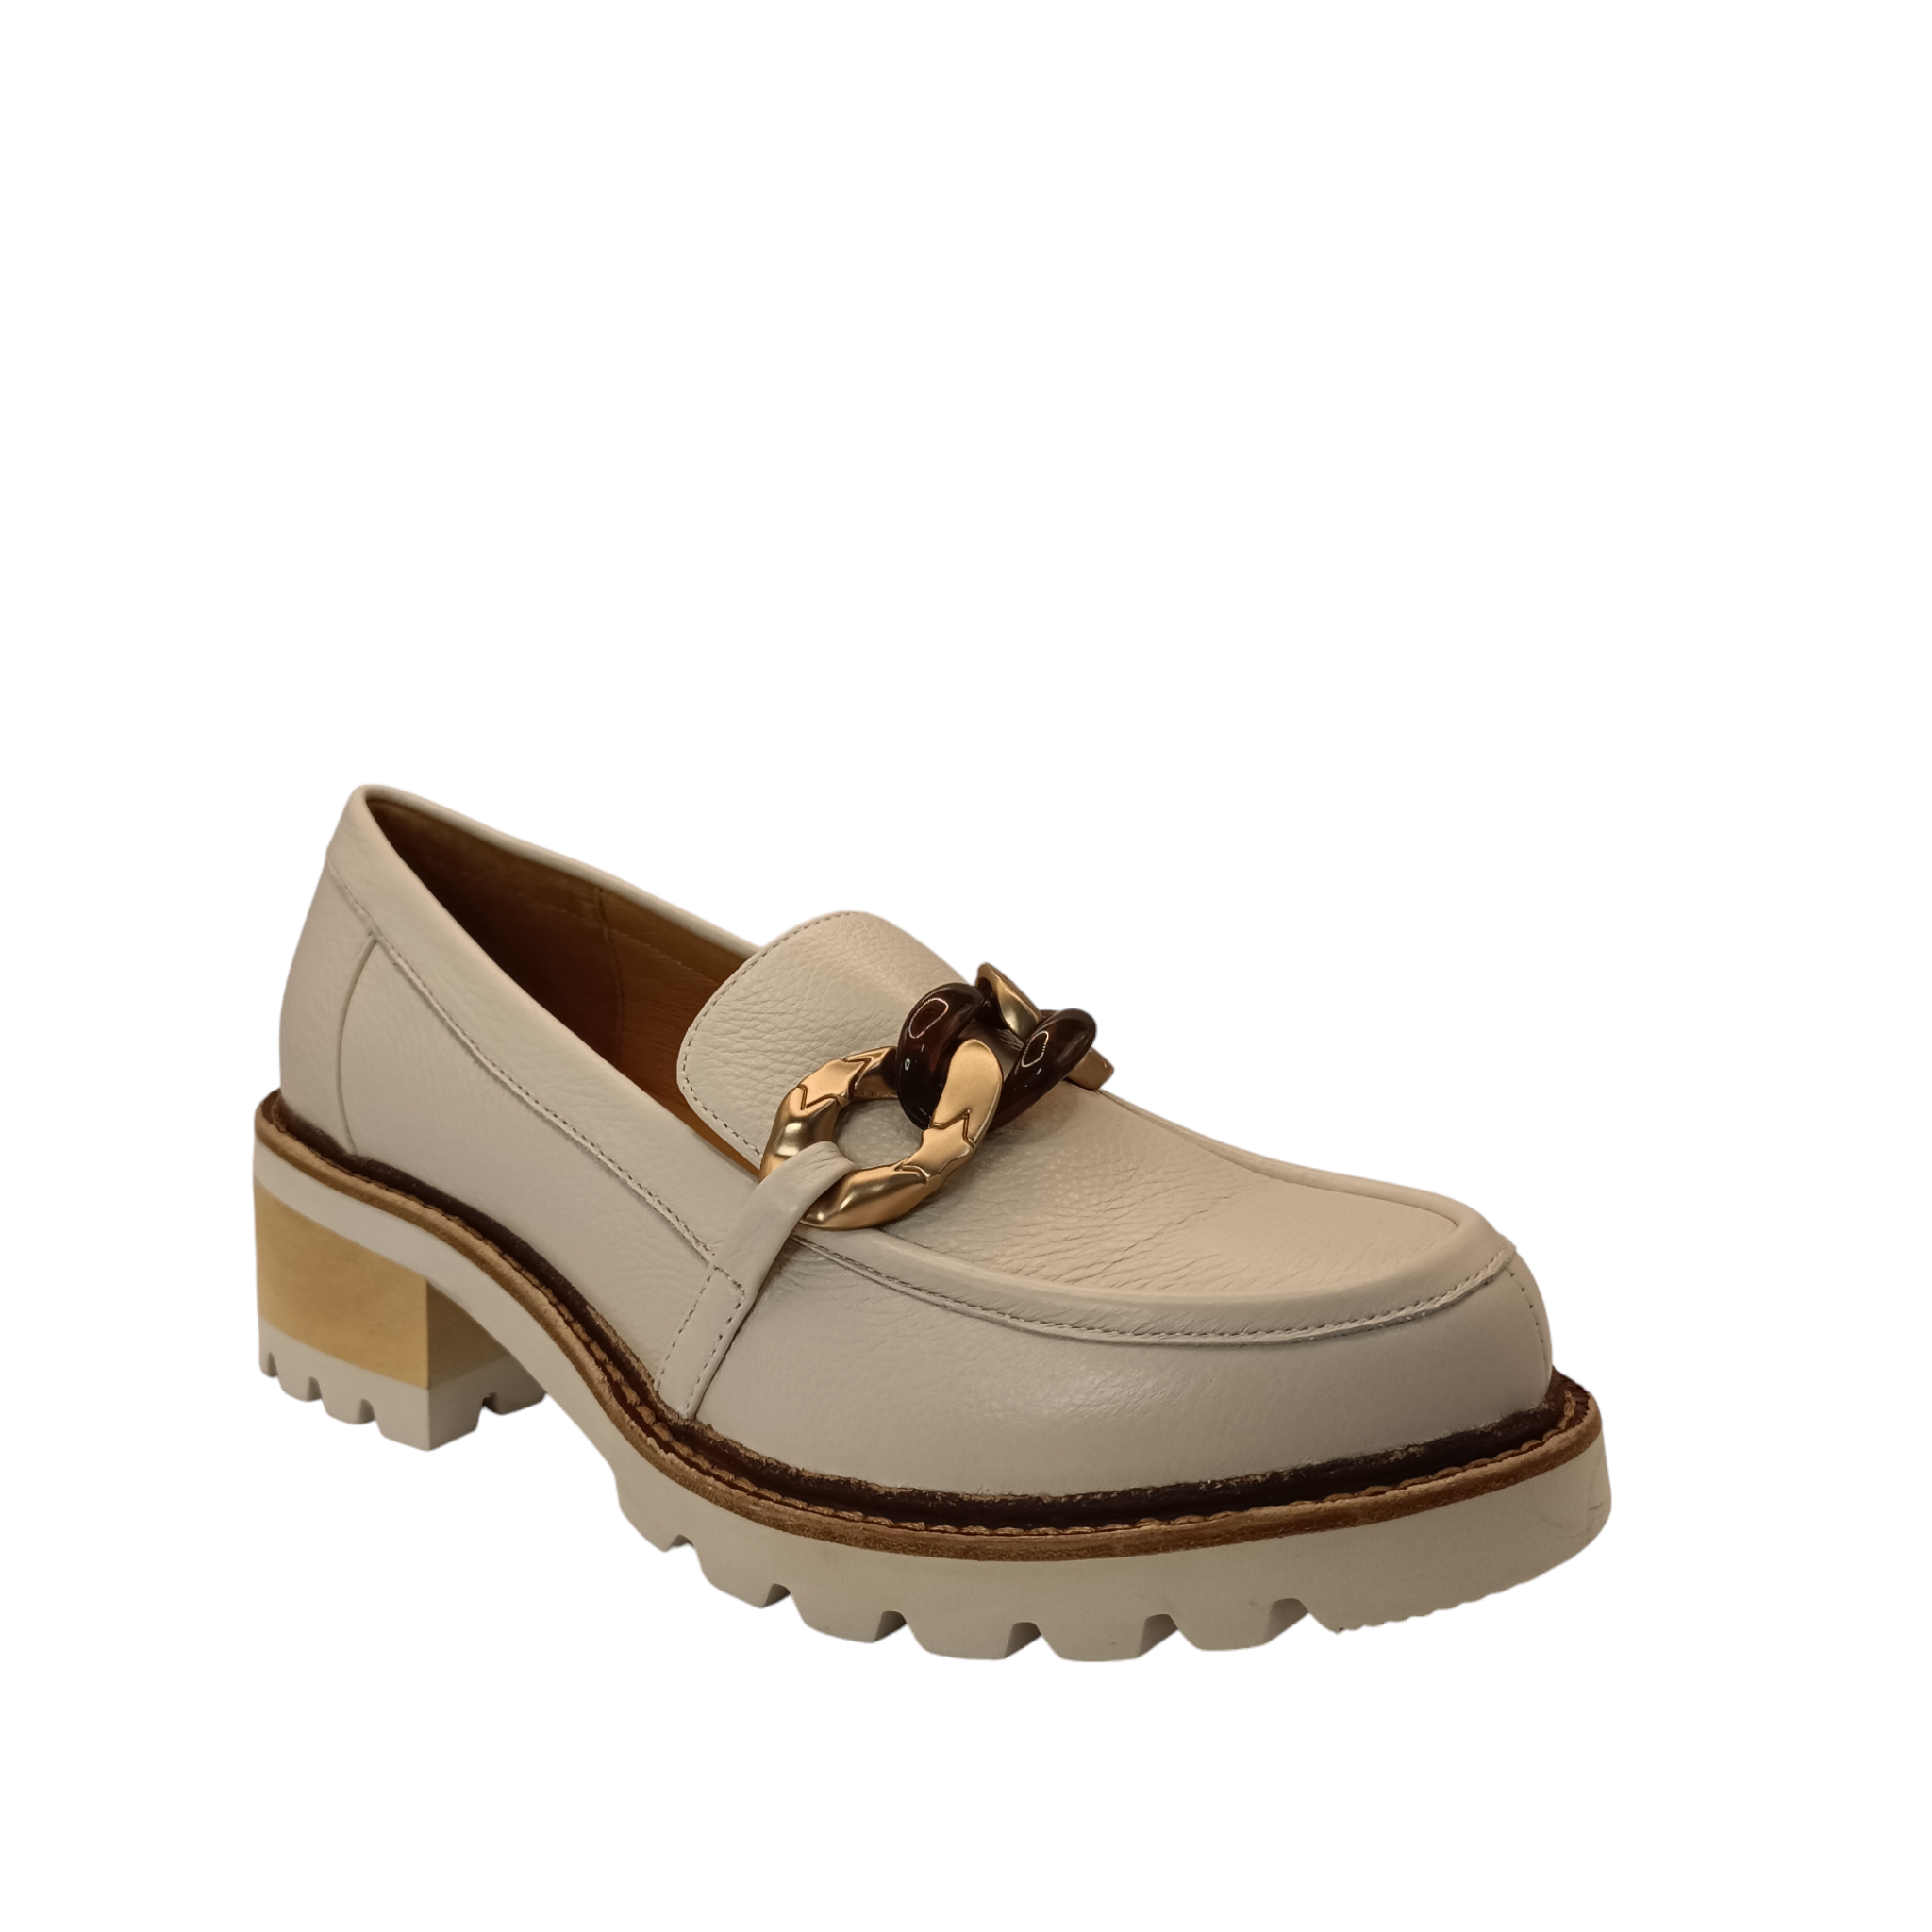 Shop Doctrin Bresley - with shoe&me - from Bresley - Shoes - shoes, Winter, Womens - [collection]